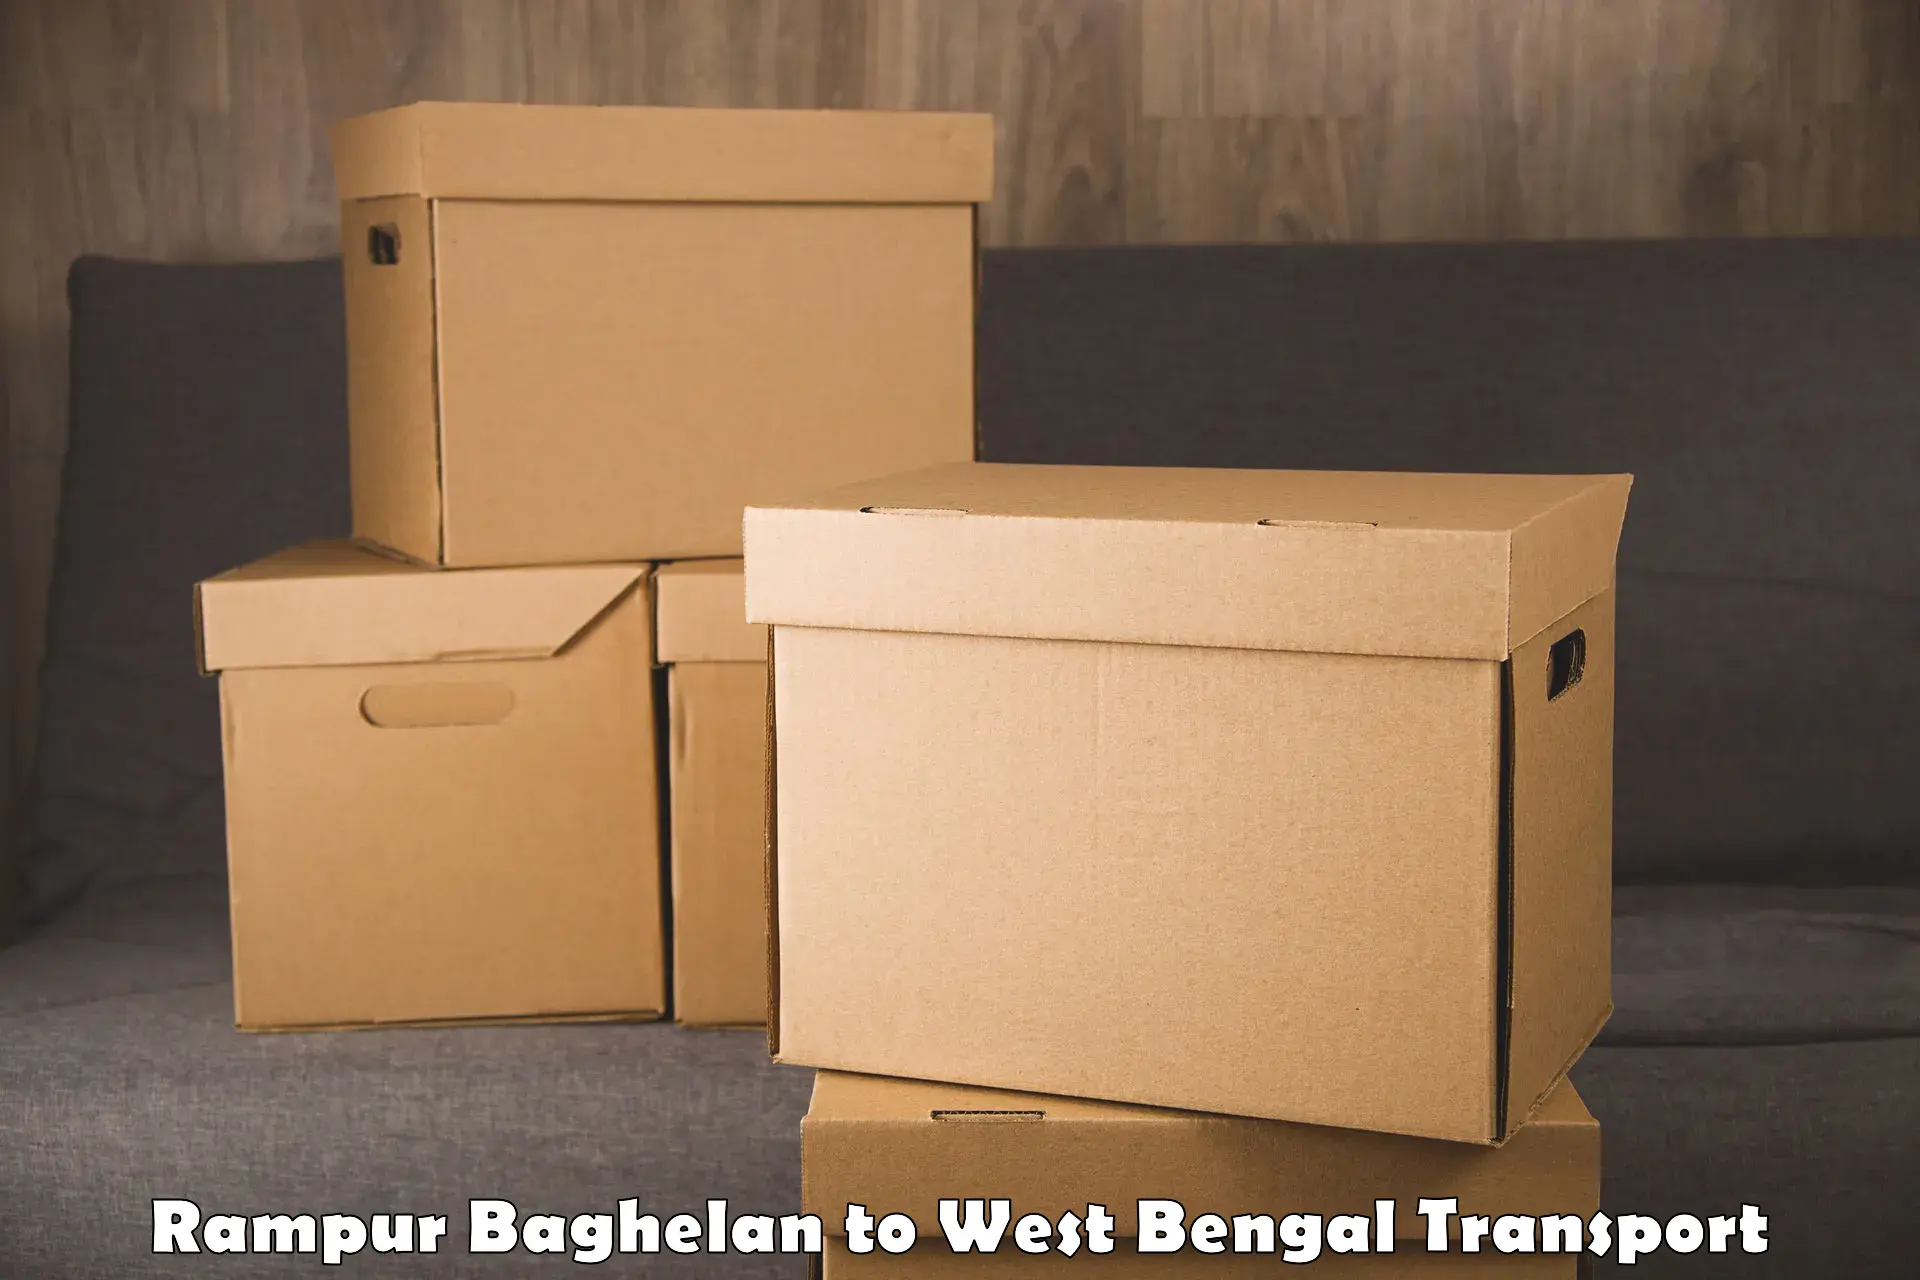 Air freight transport services Rampur Baghelan to Hooghly